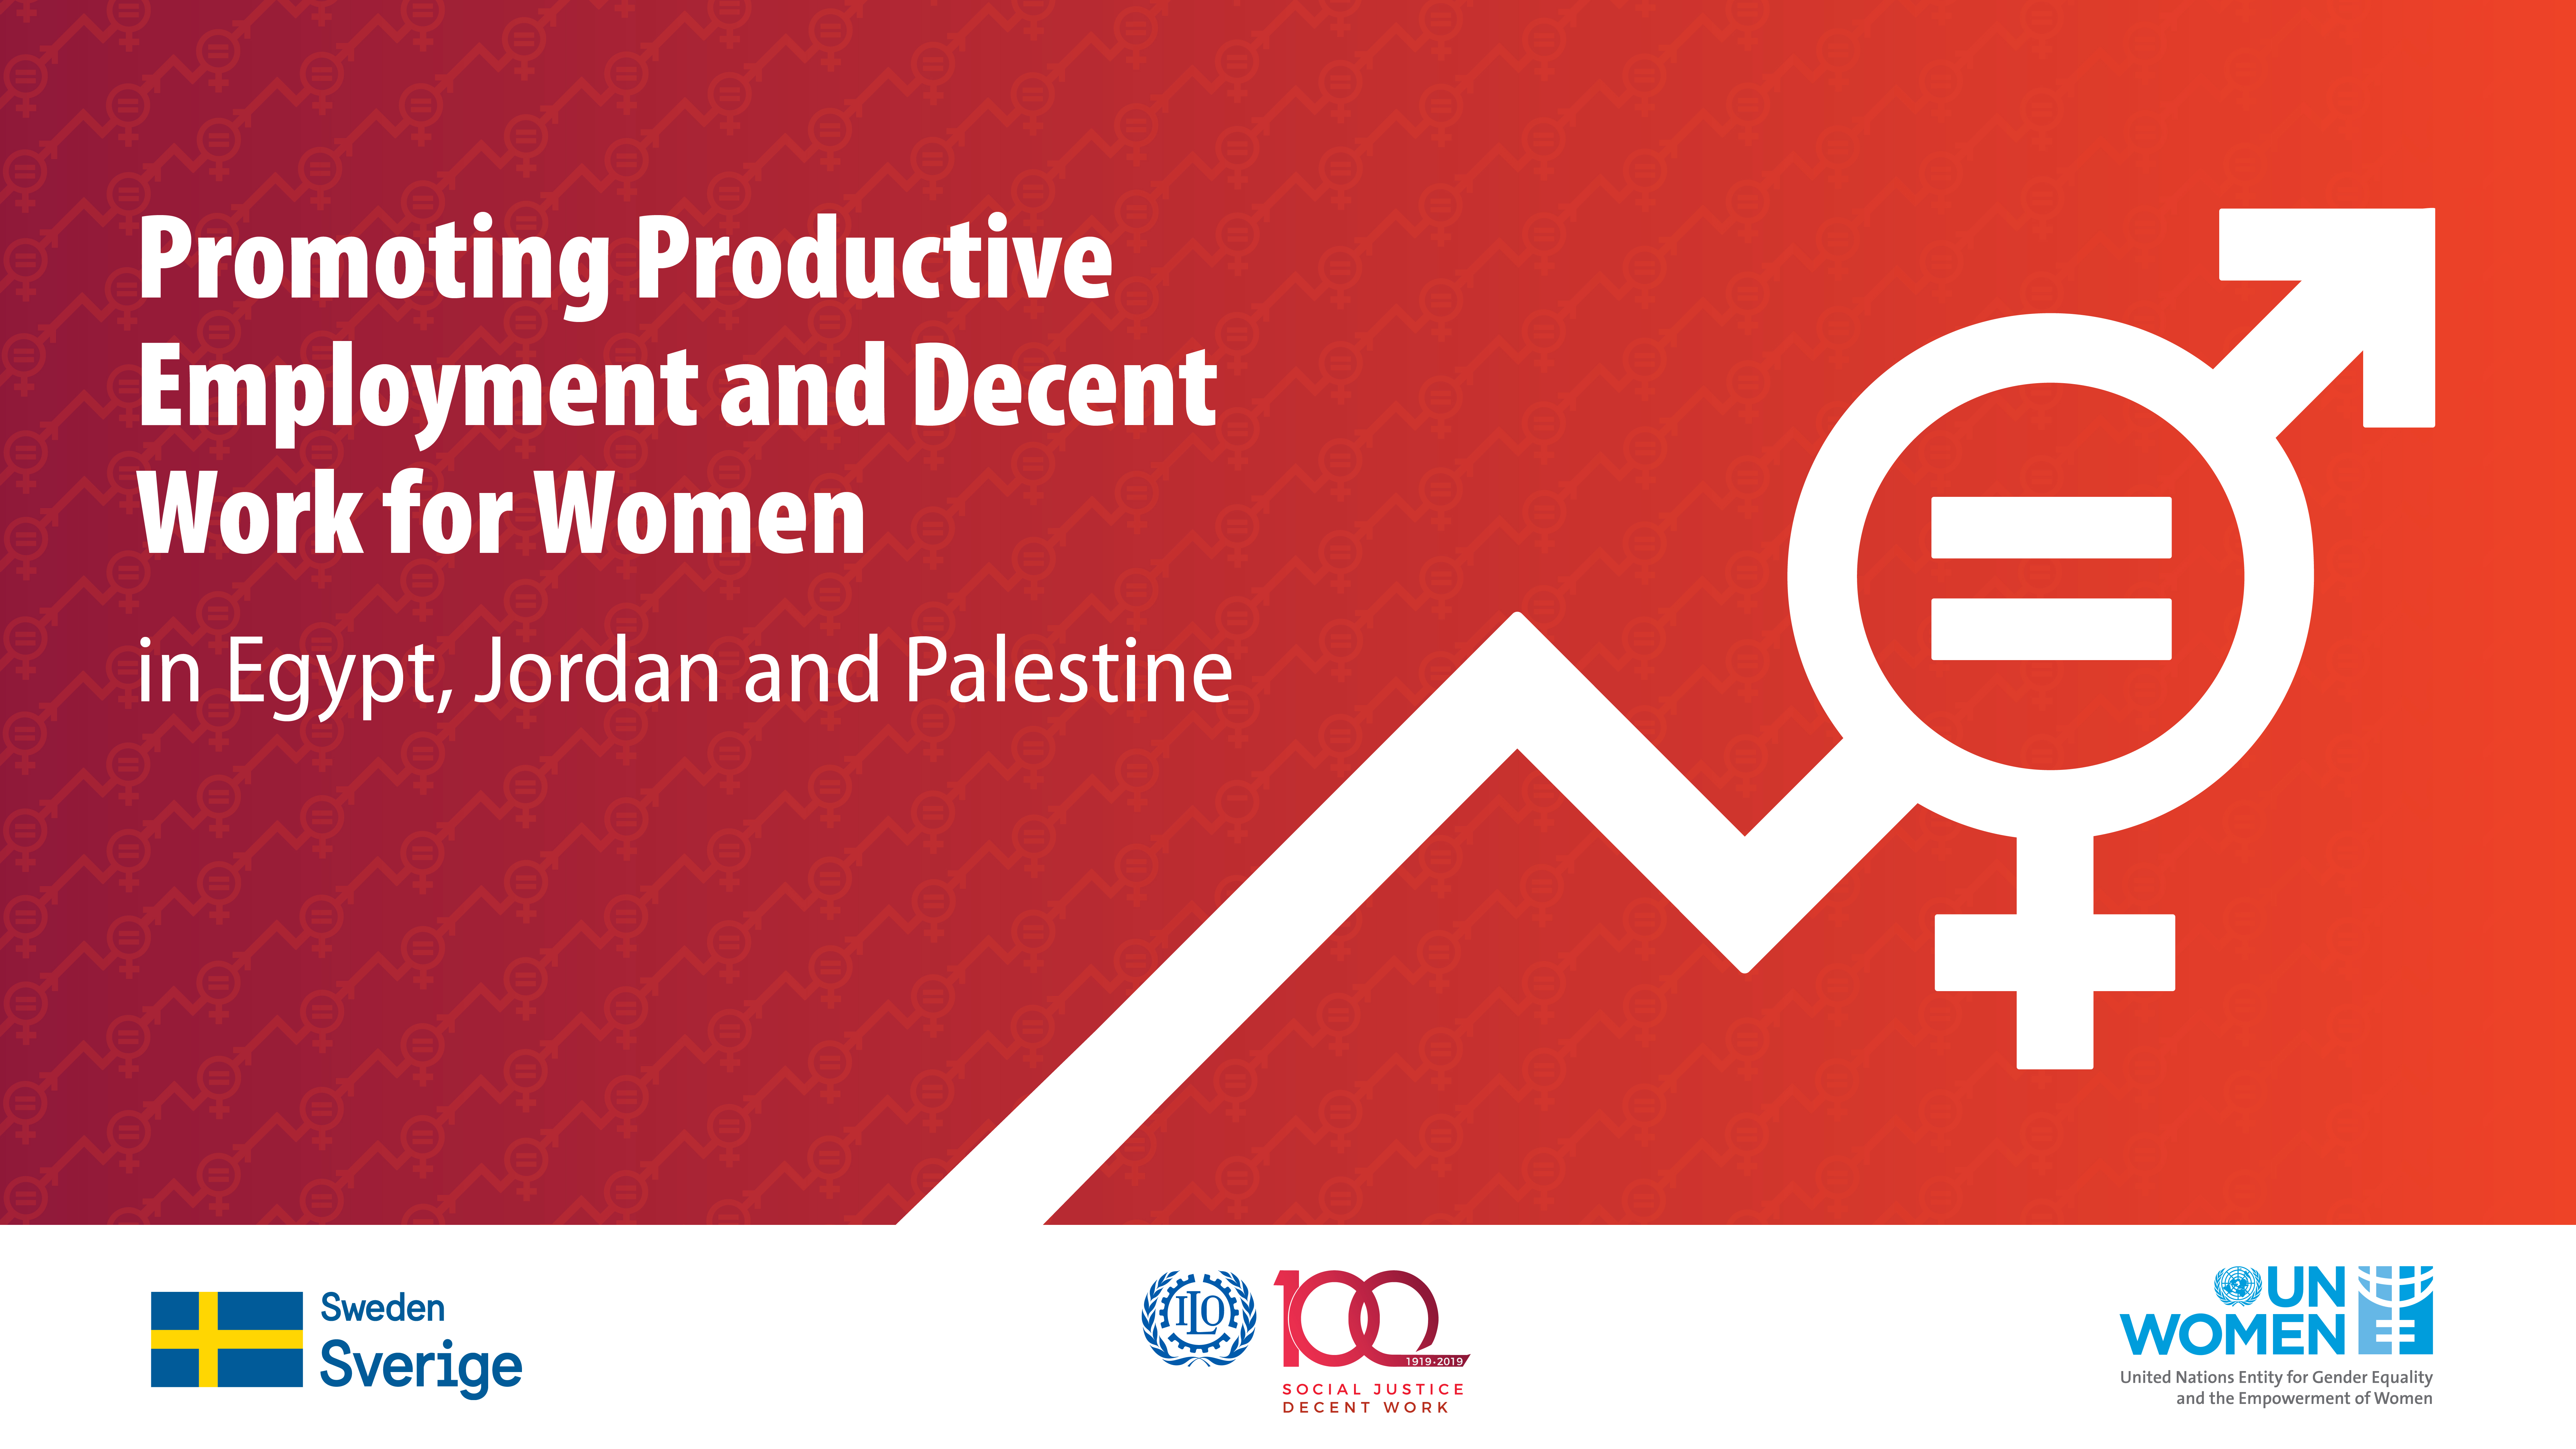 Promoting Productive Employment and Decent Work for Women in Egypt, Jordan, and Palestine (Work4Women) UN Women